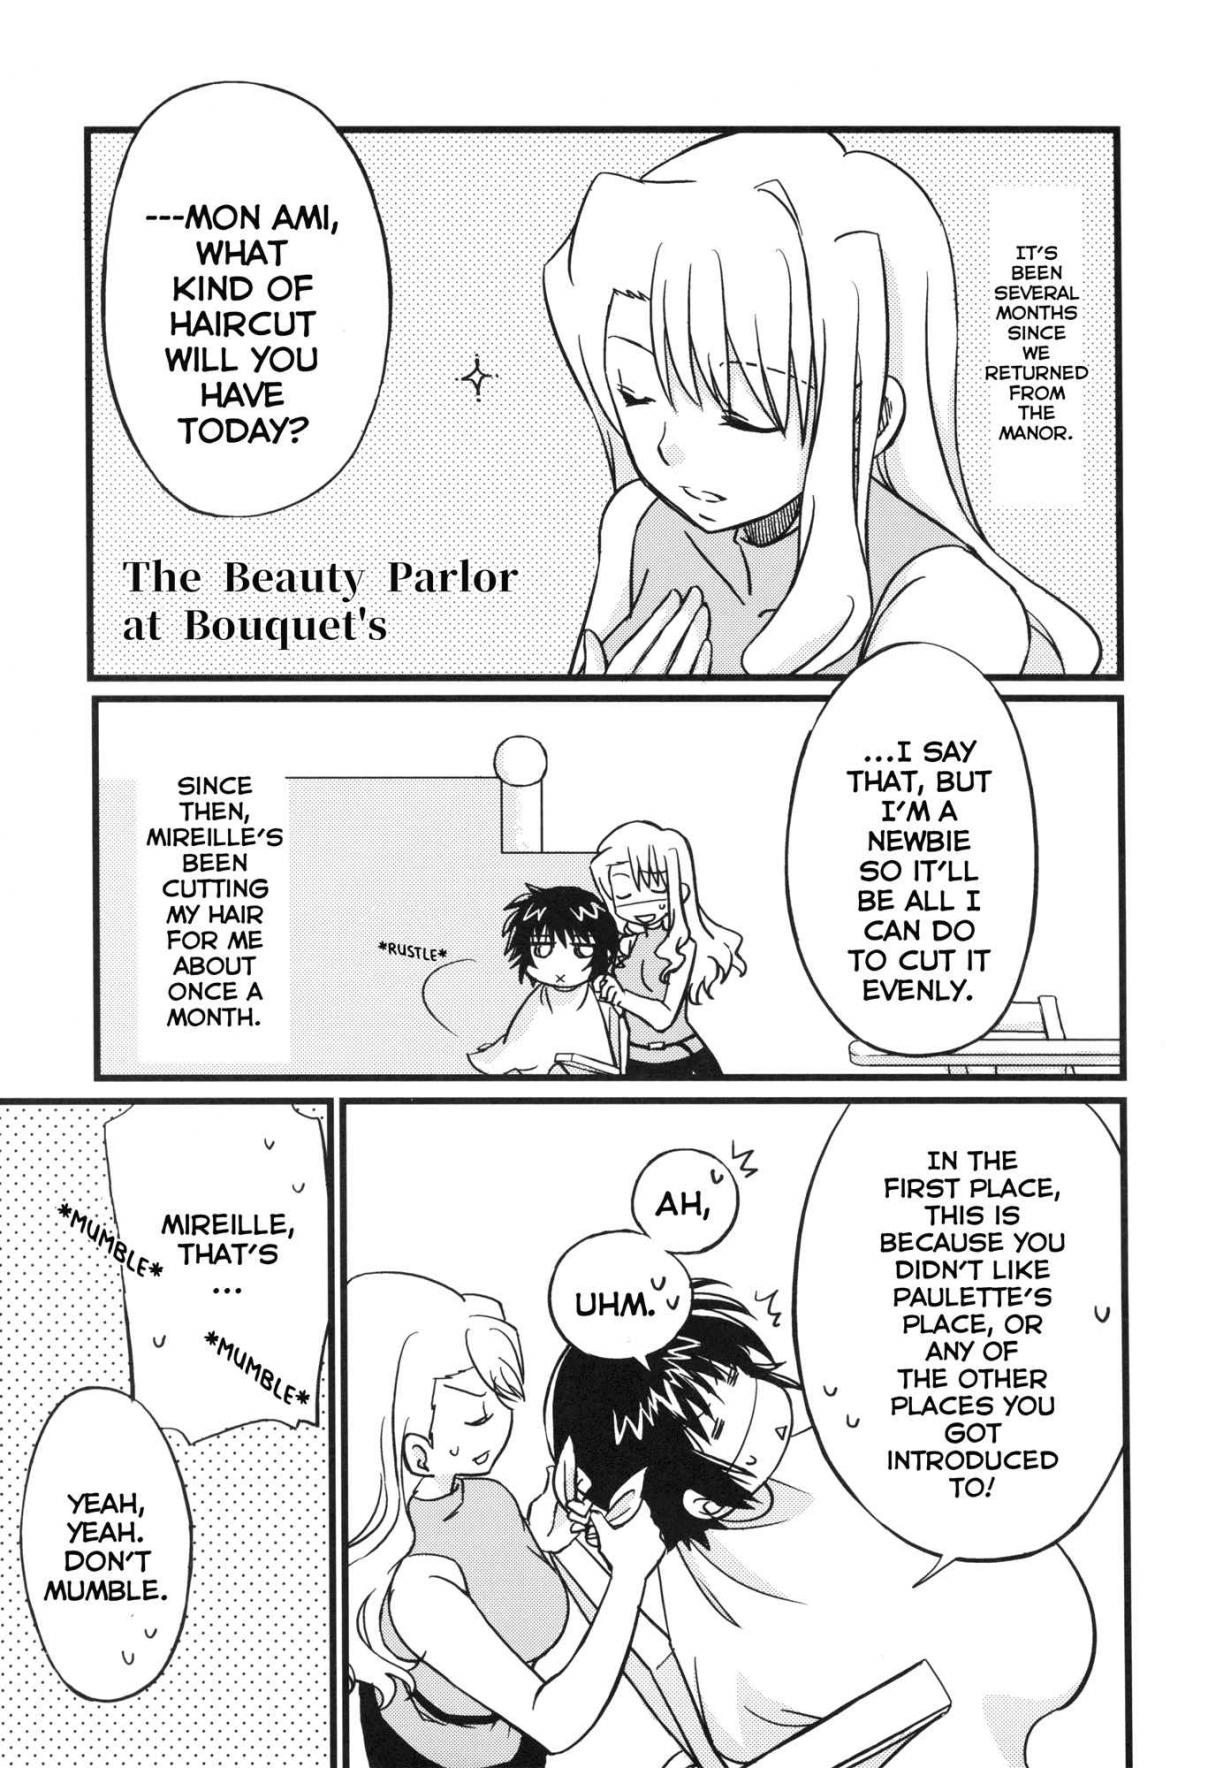 Noir Beware of Coppelia! (Doujinshi) Vol. 1 Ch. 9 The Beauty Parlor at Bouquet's (by Takemaru)